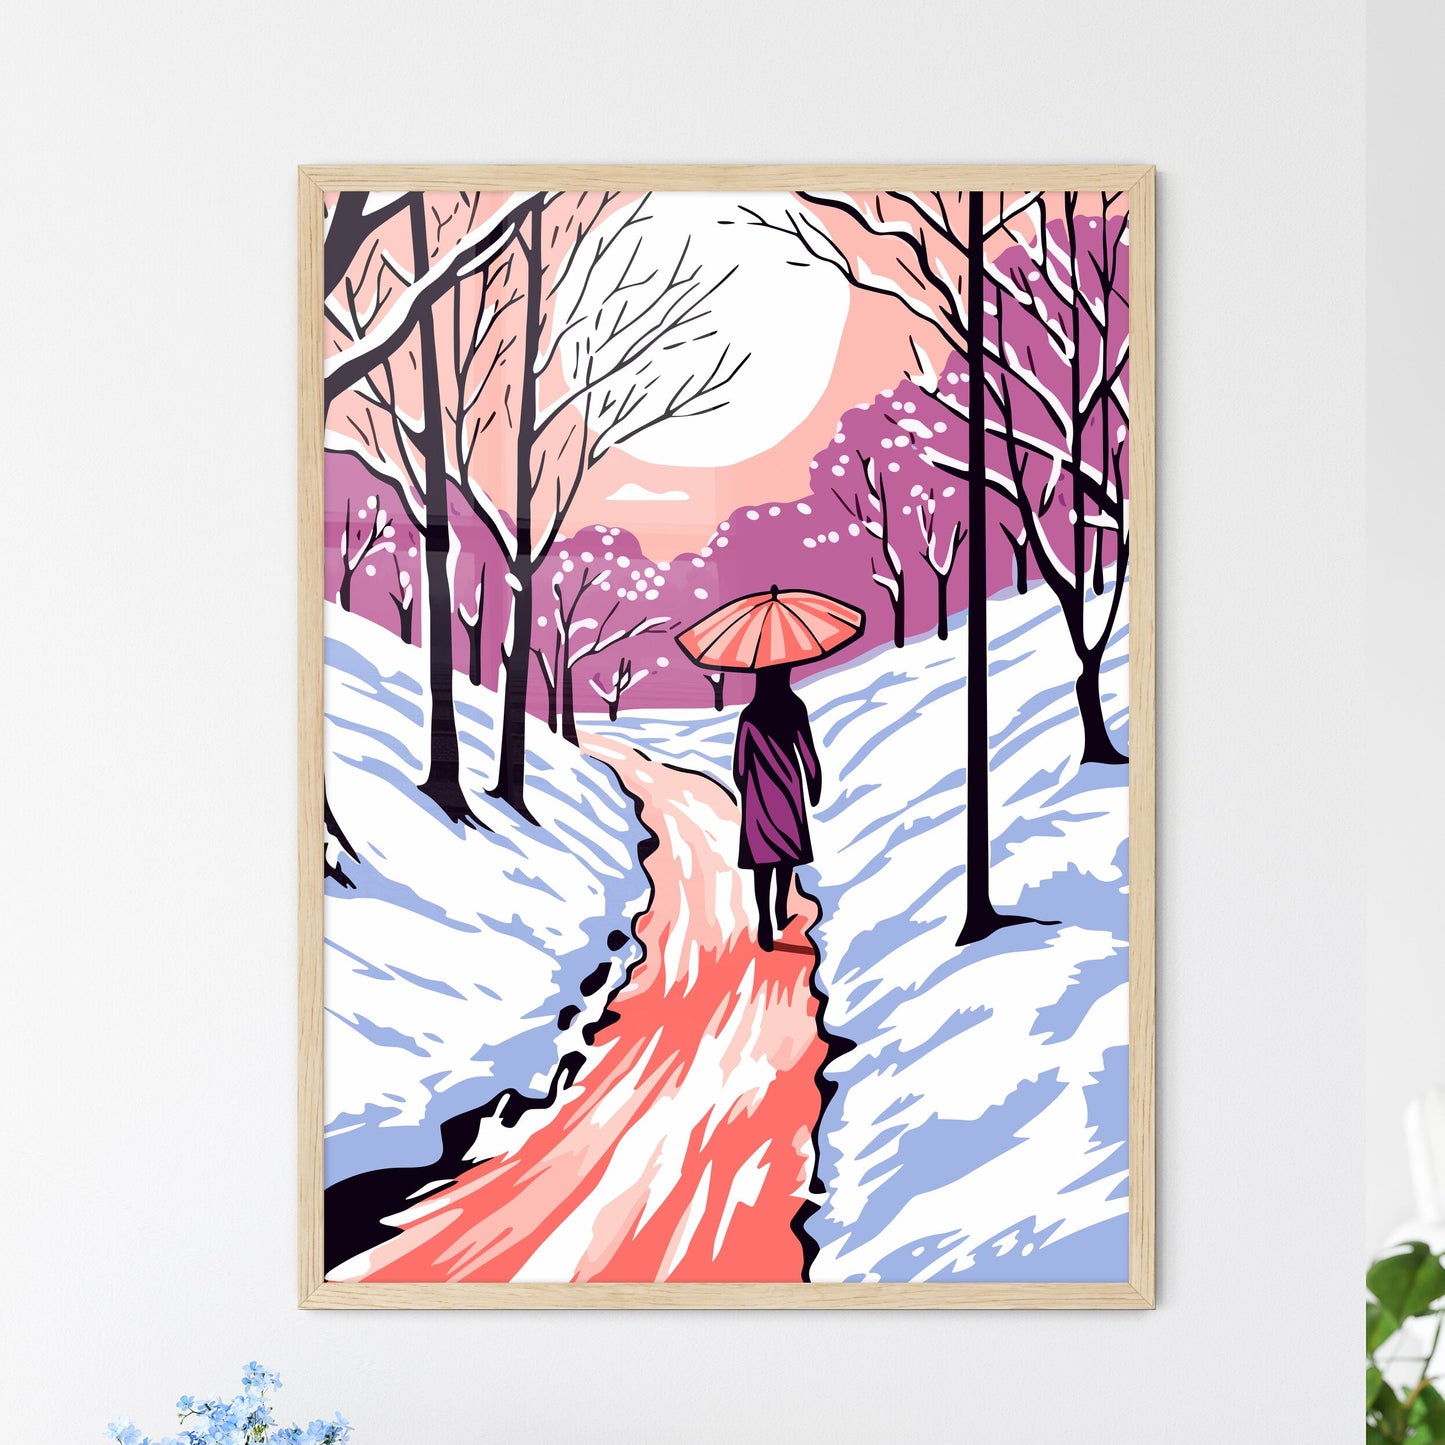 Girl With Umbrella Walking On The Path - A Woman Walking On A Snowy Path With A Pink Umbrella Default Title